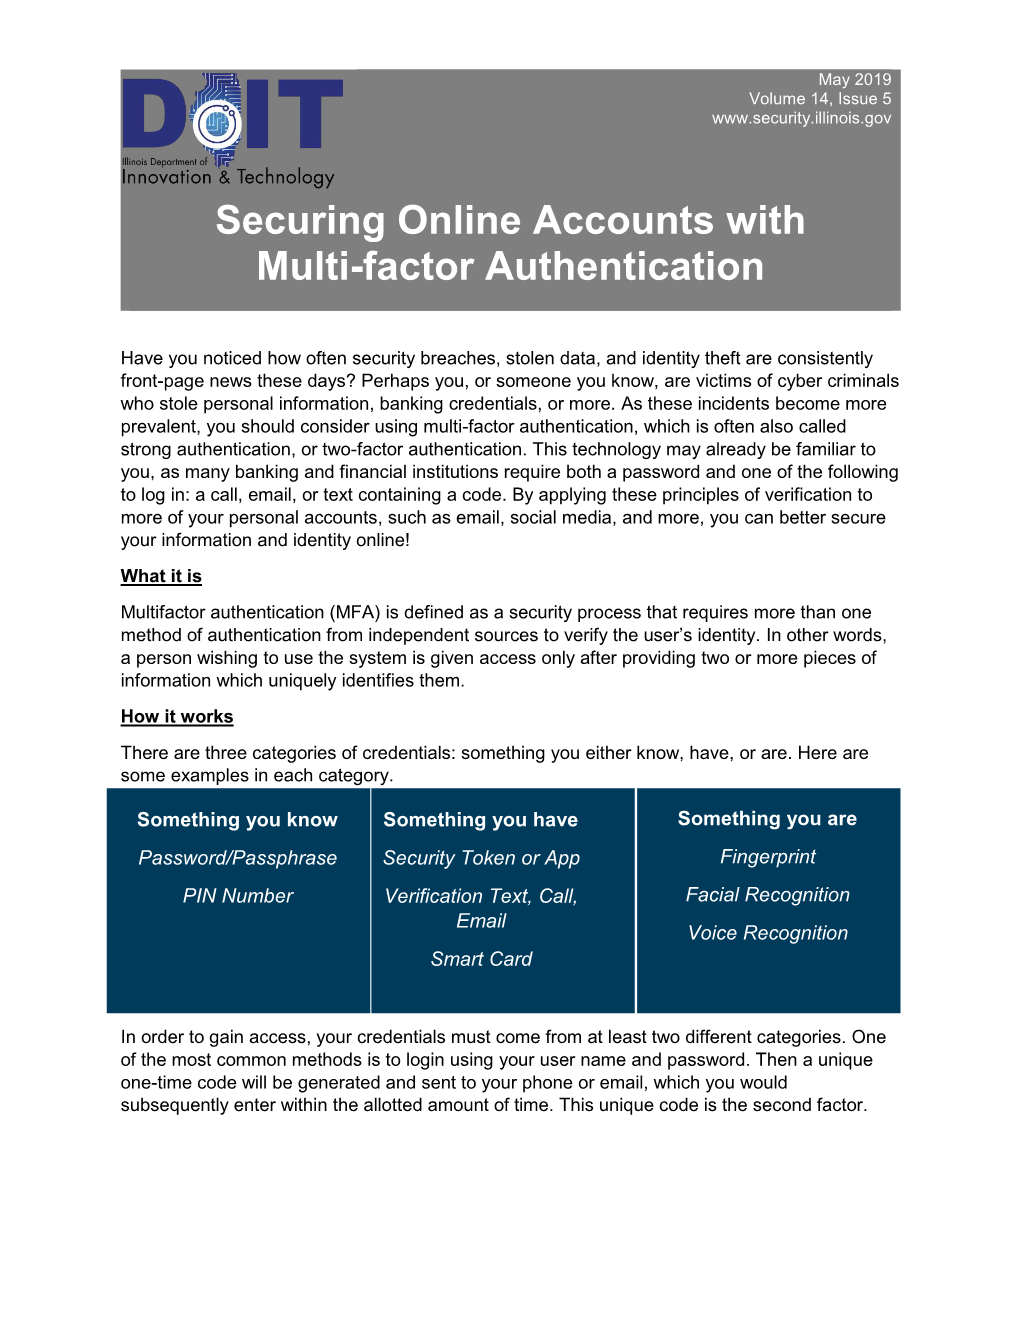 Securing Online Accounts with Multi-Factor Authentication